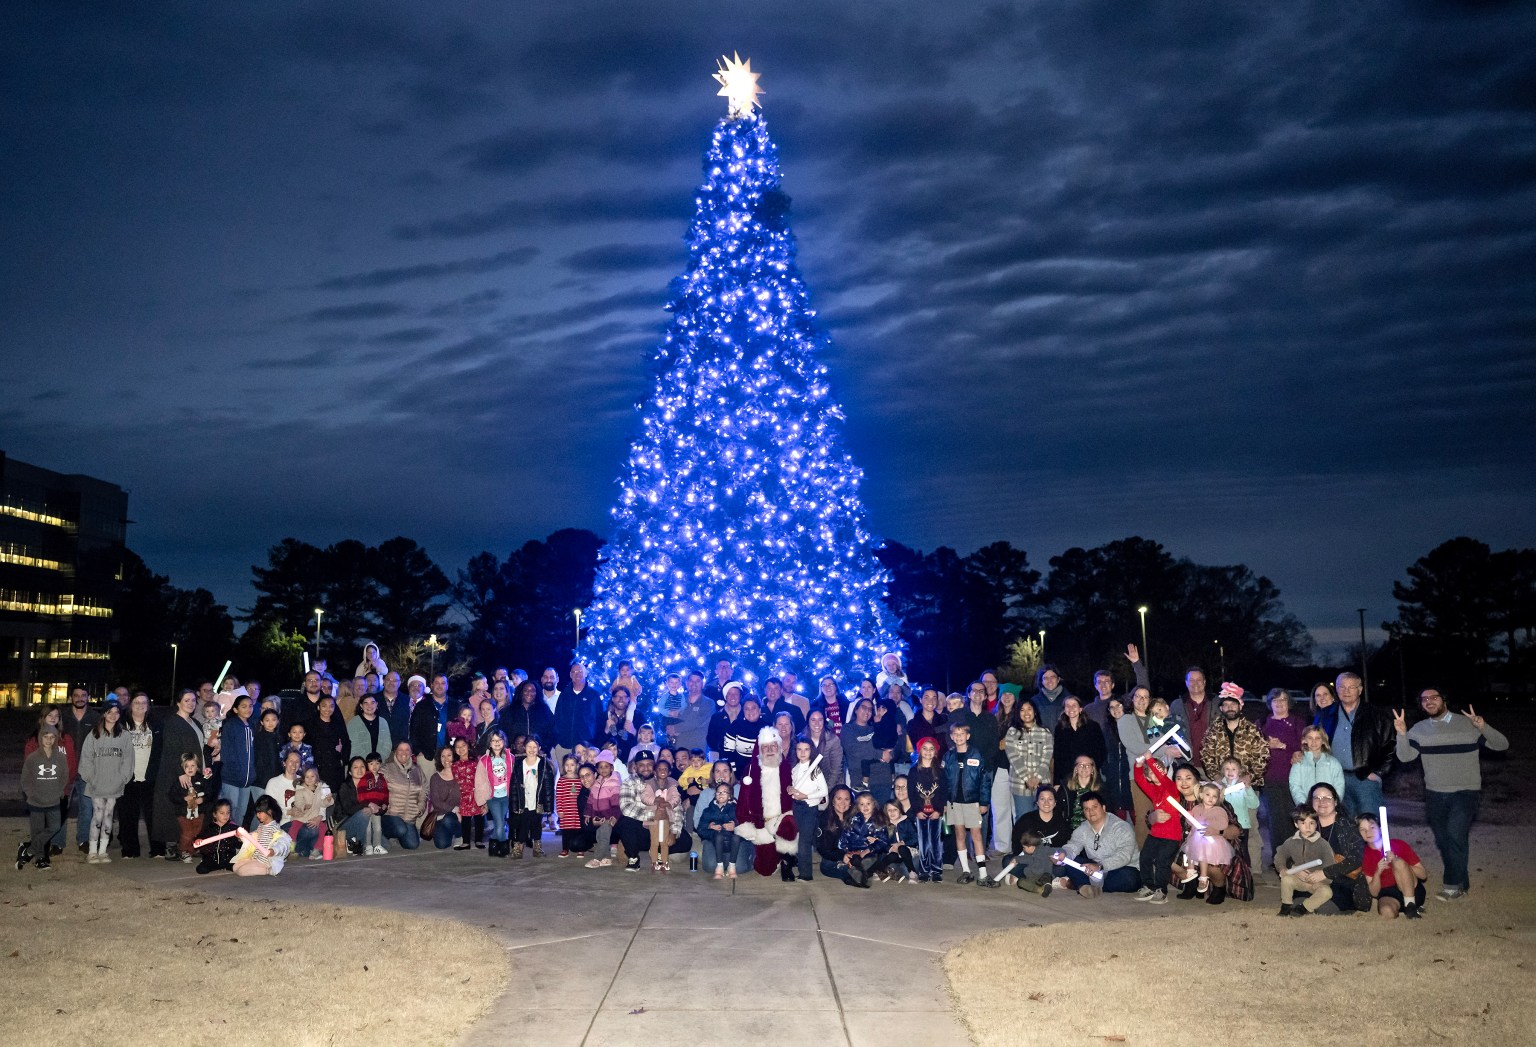 Marshall team members and their family members smile cheerfully as they pose in front of the tree after it was lit. “The holiday season is such a special time for so many people,” Pelfrey said. “To see all the Marshall team members out celebrating with their kids makes for a special day. It was really great to see.”